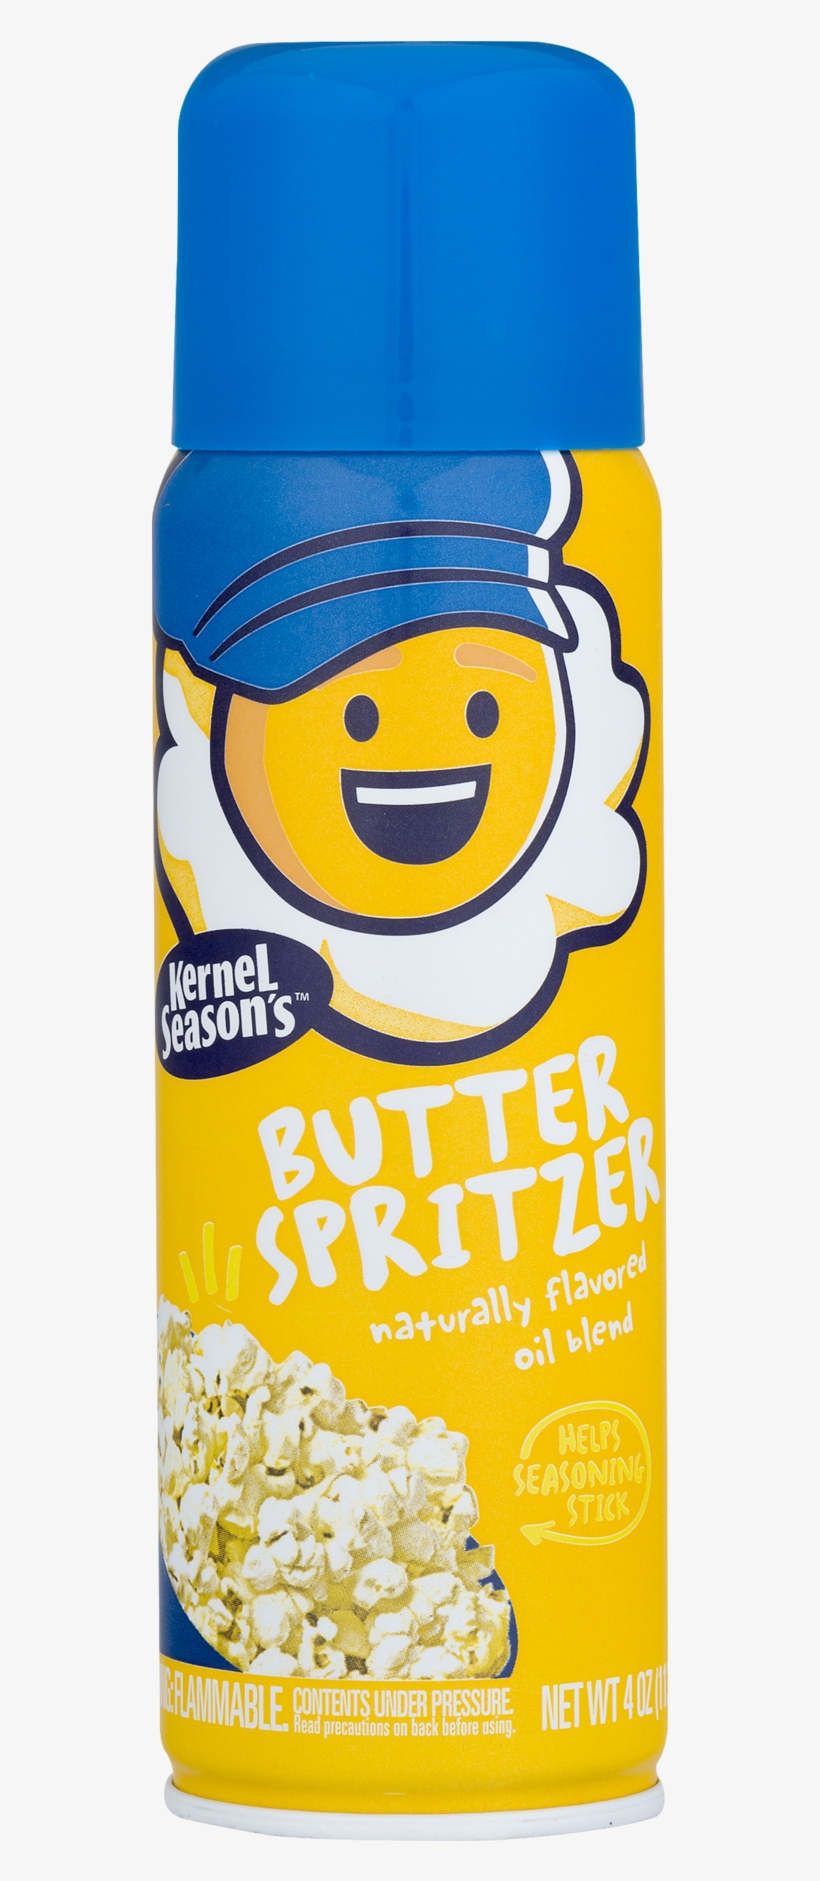 Kernel Seasons Movie Theater Butter Popcorn Spritzer - Kernel Season's Butter Spritzer, transparent png #9539945